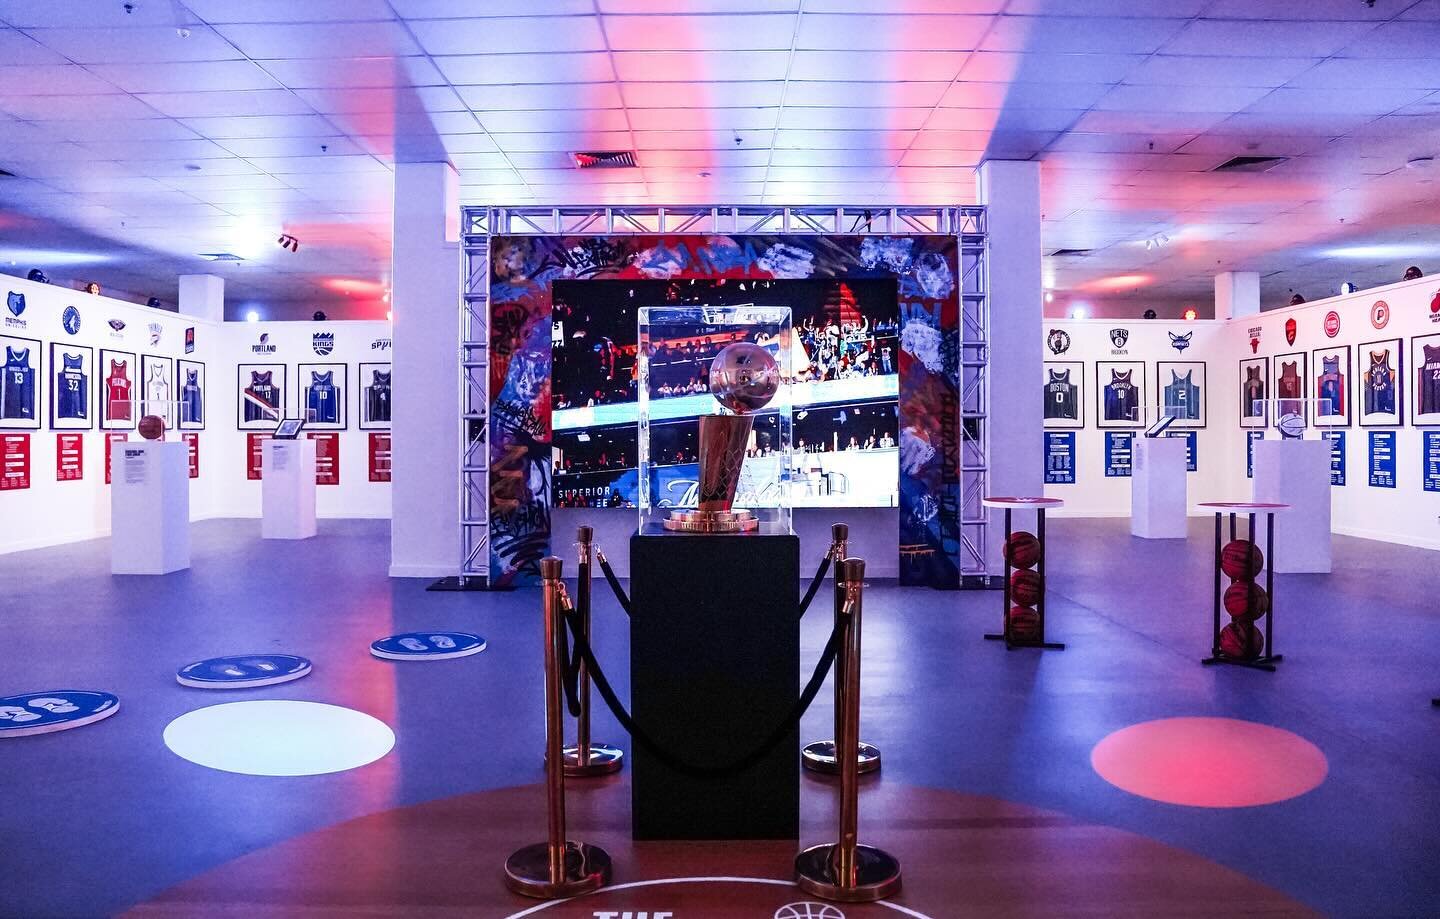 Interactive fan experience &ldquo;The NBA Exhibition&rdquo; is coming to Melbourne! Details: 

⏰: Opening Wednesday 3rd April, 2024
📍: The District Docklands, Melbourne 
🎫: Tickets on sale beginning Feb 21. Register your interest at thenbaexhibitio